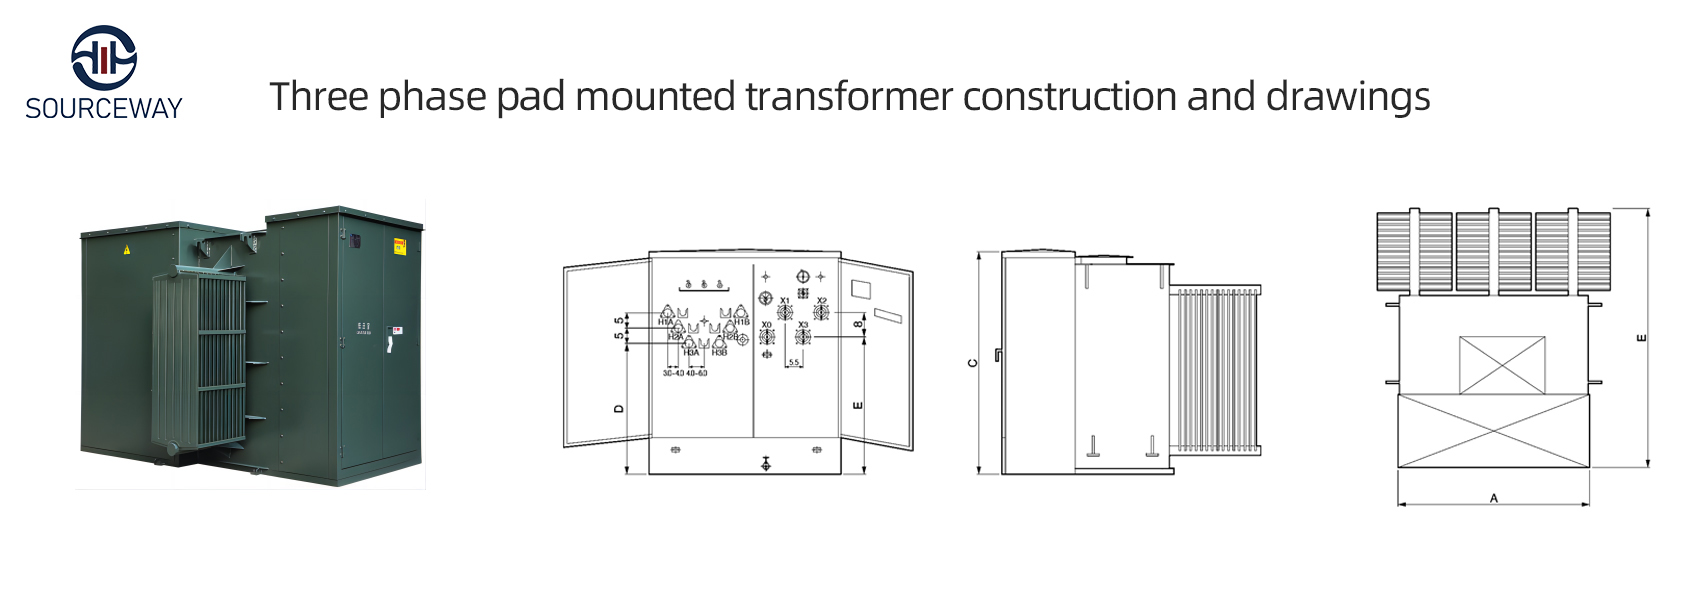 Three phase pad mounted transformer construction and drawings